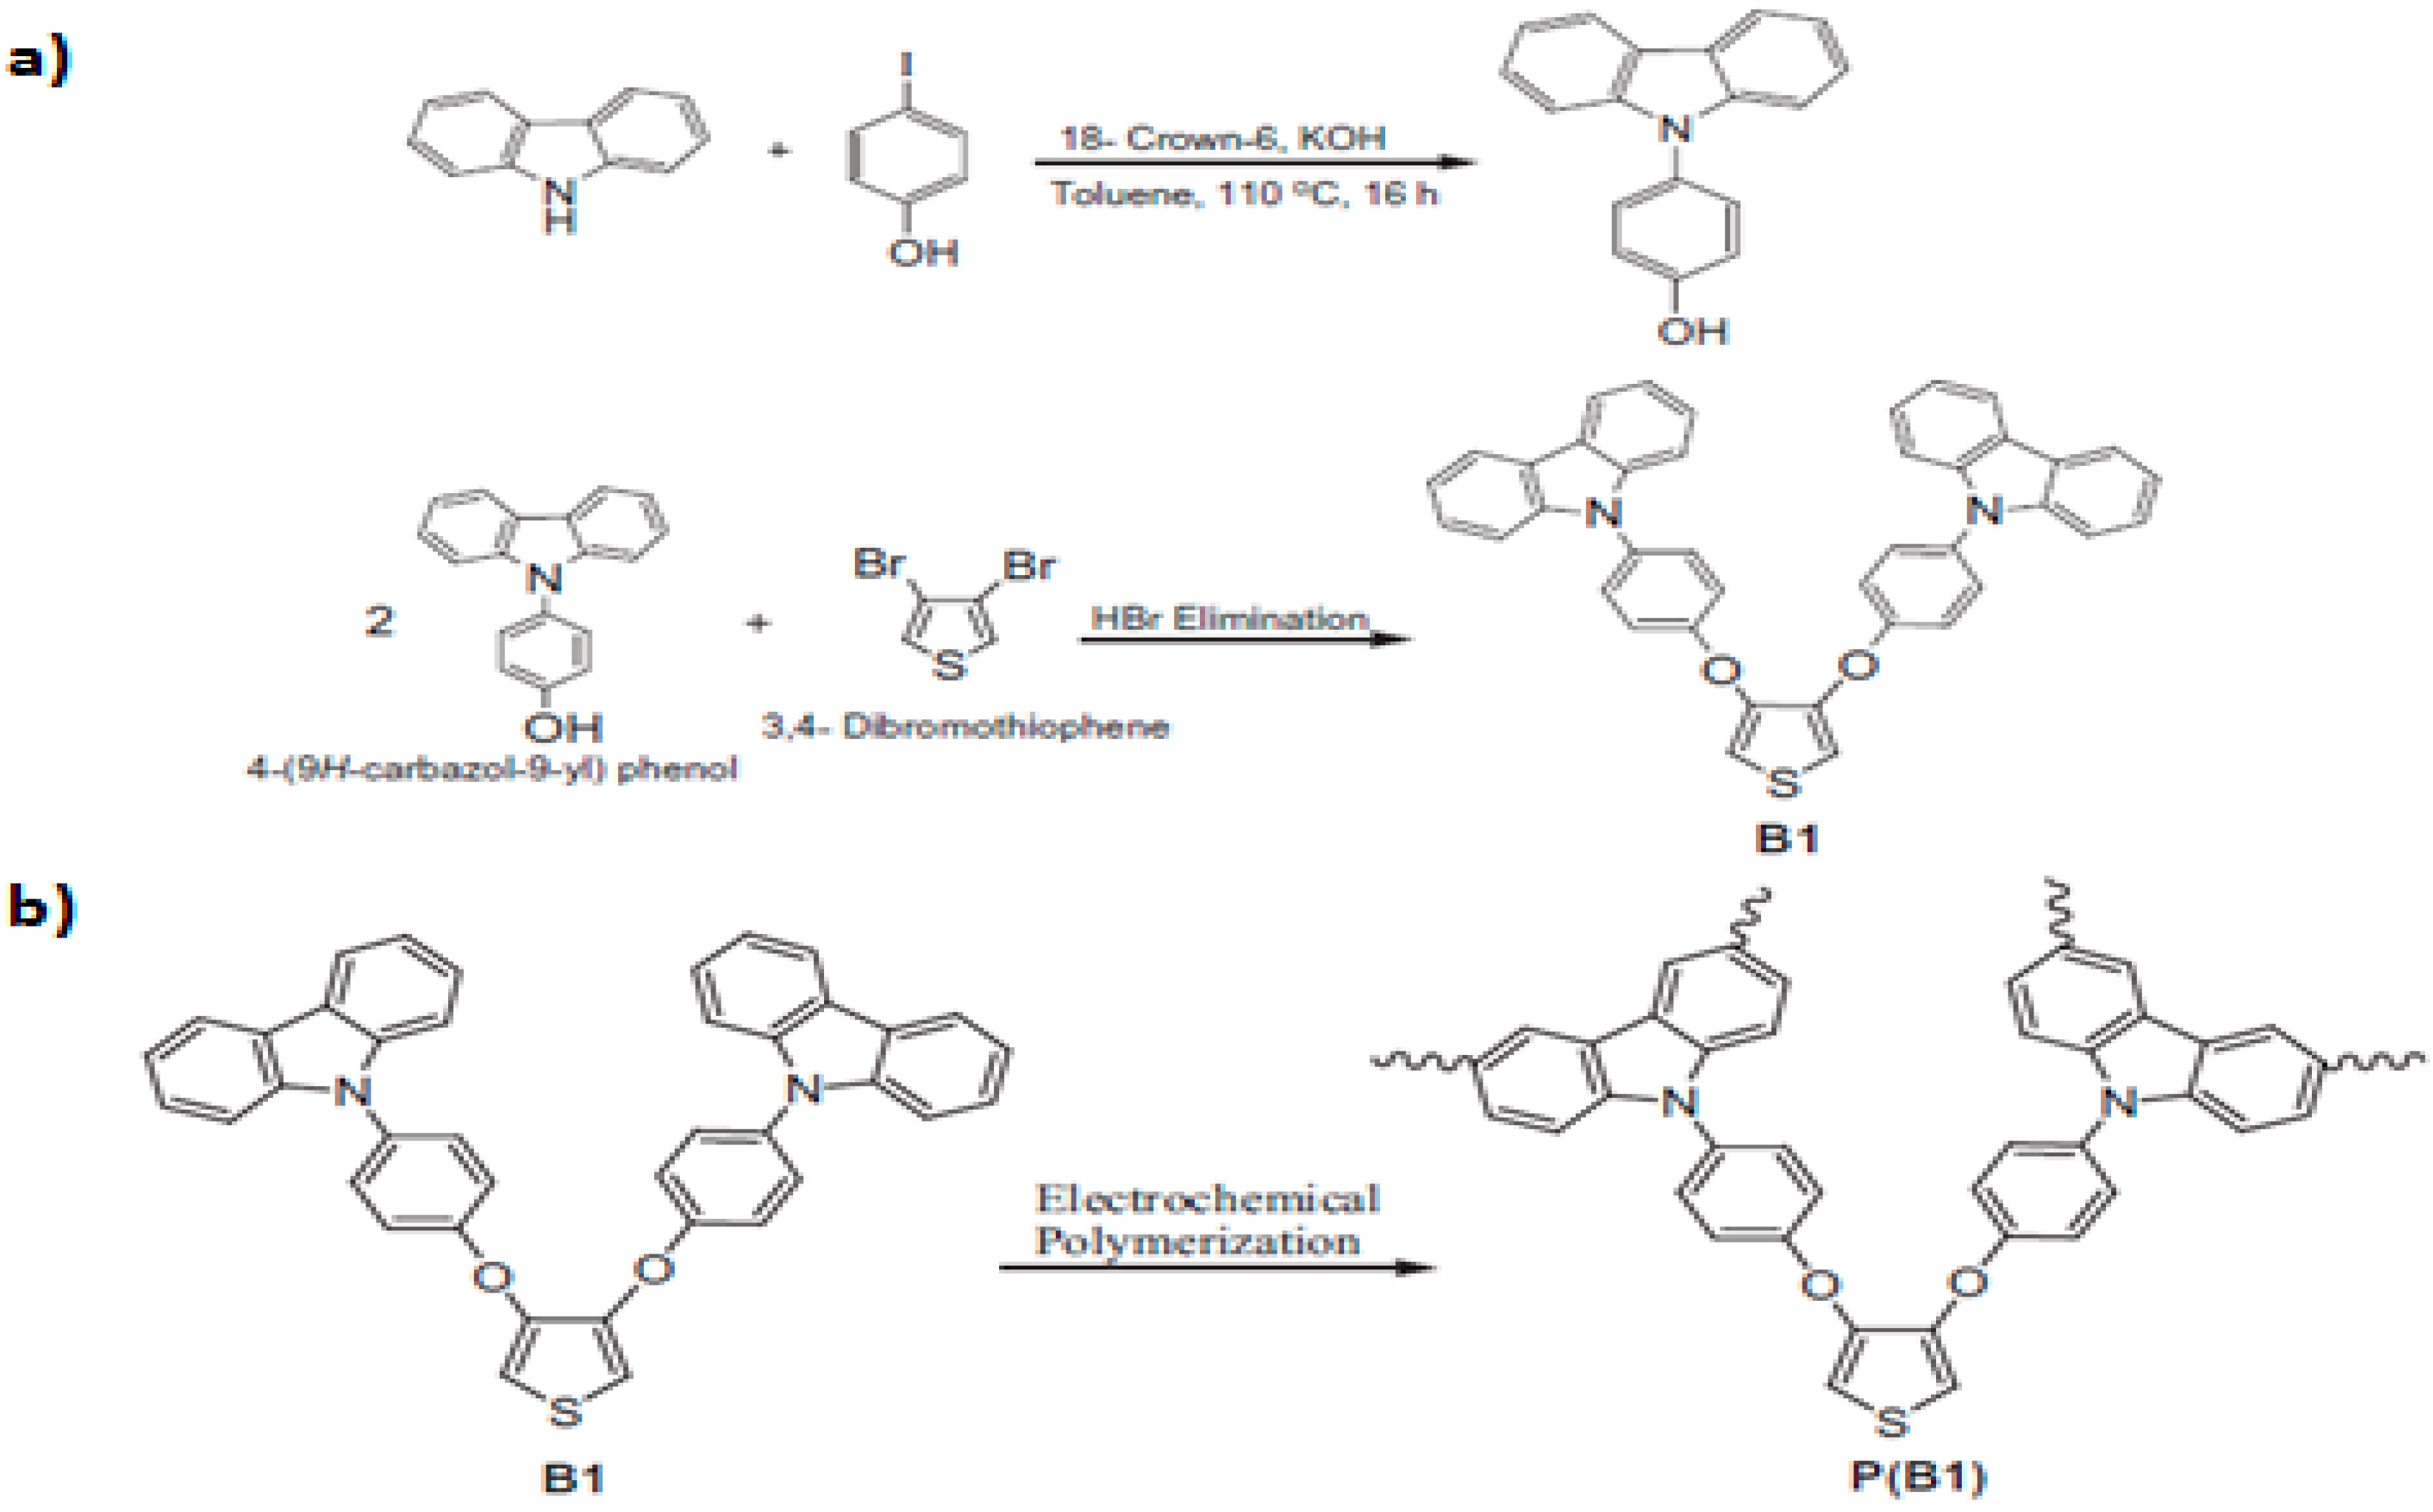 Polymers Free Full Text Polycarbazole And Its Derivatives Synthesis And Applications A Review Of The Last 10 Years Html